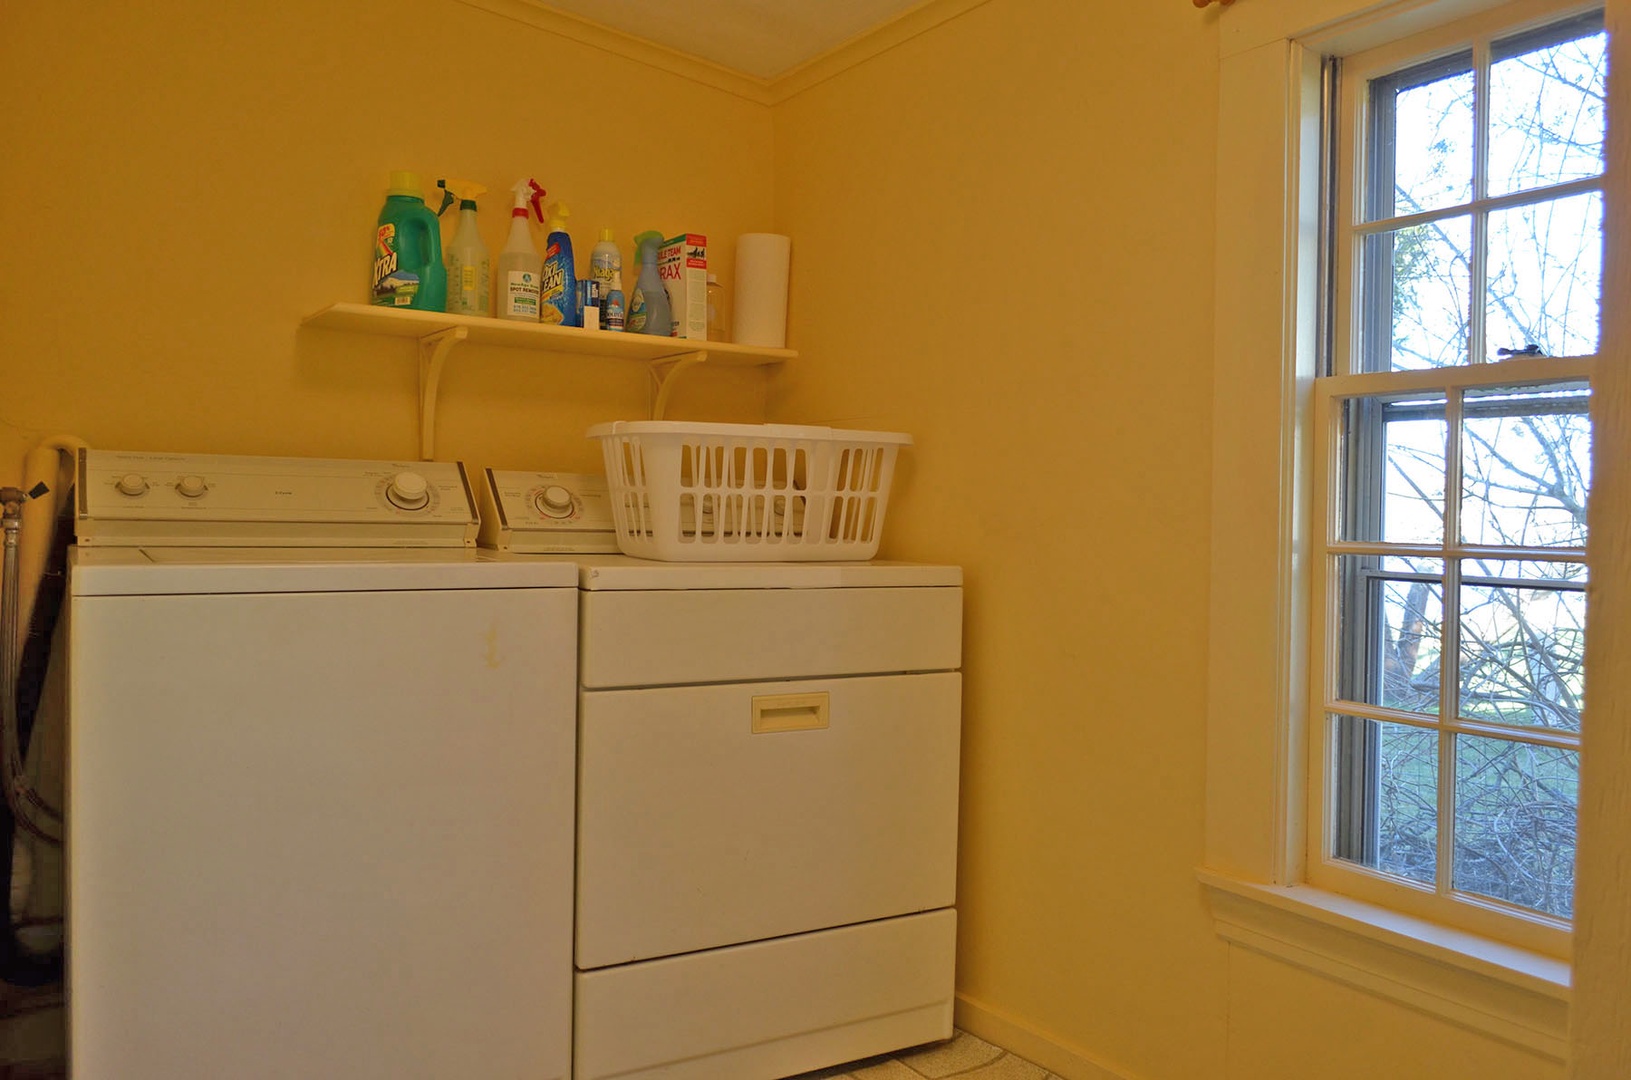 The laundry room is off of the kitchen.